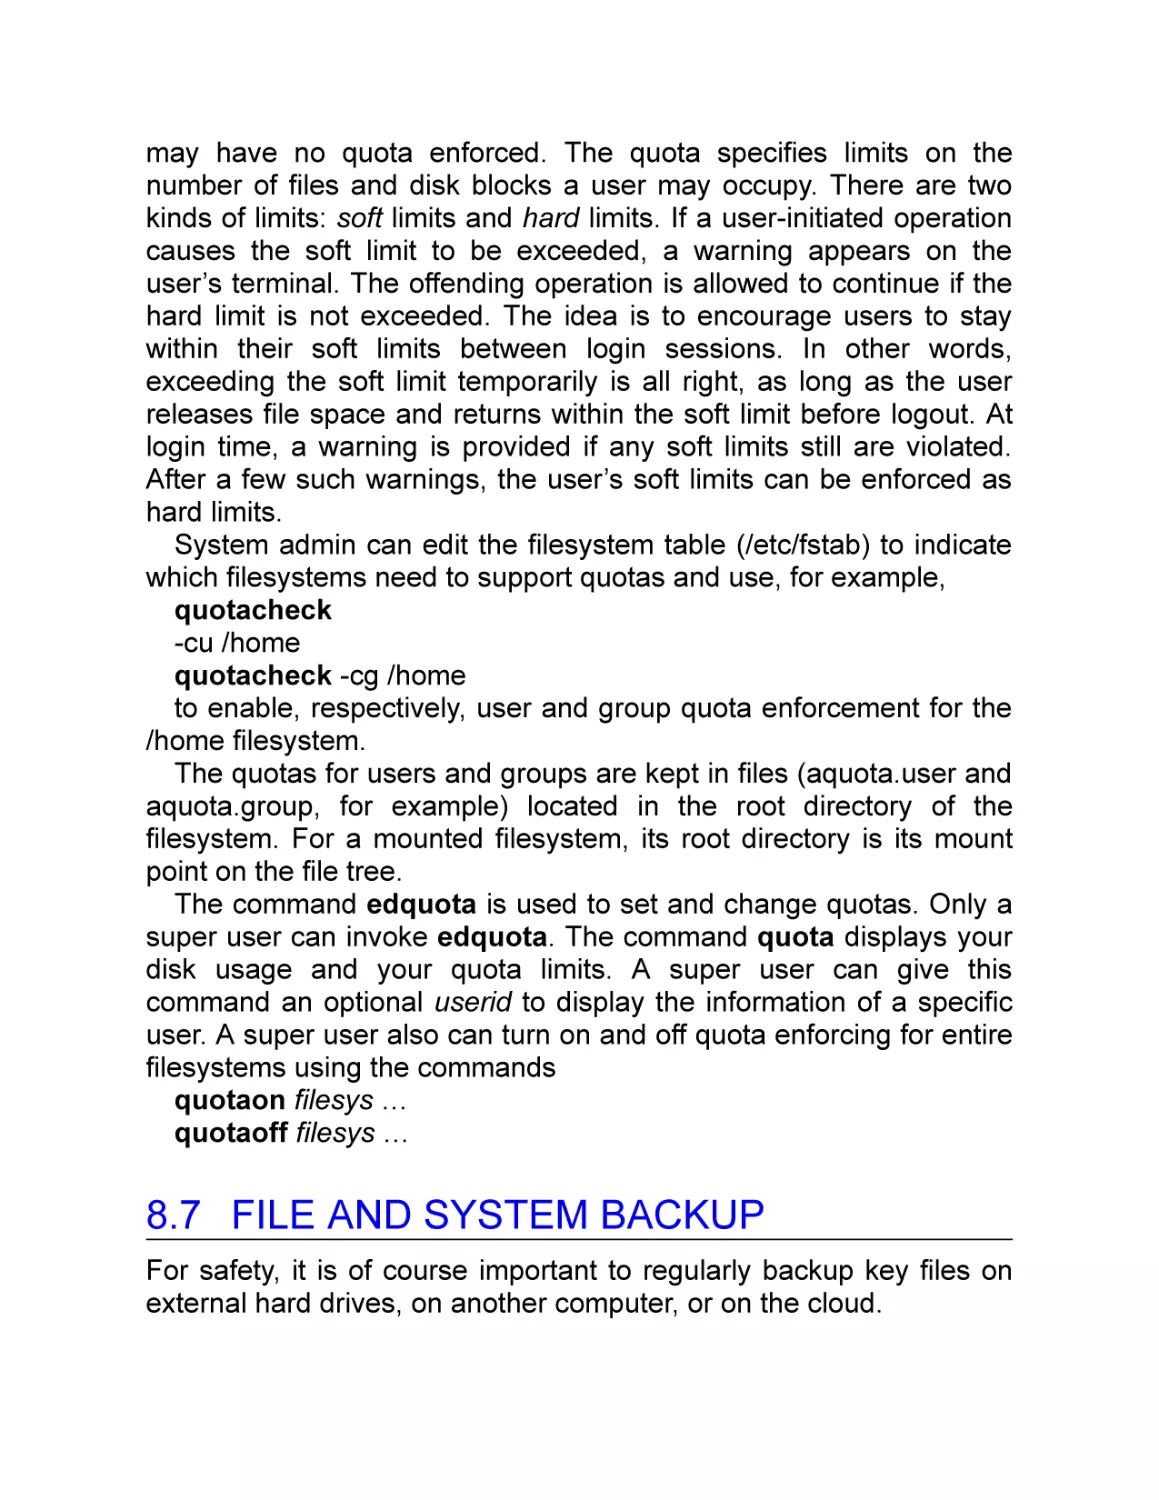 8.7 File and System Backup